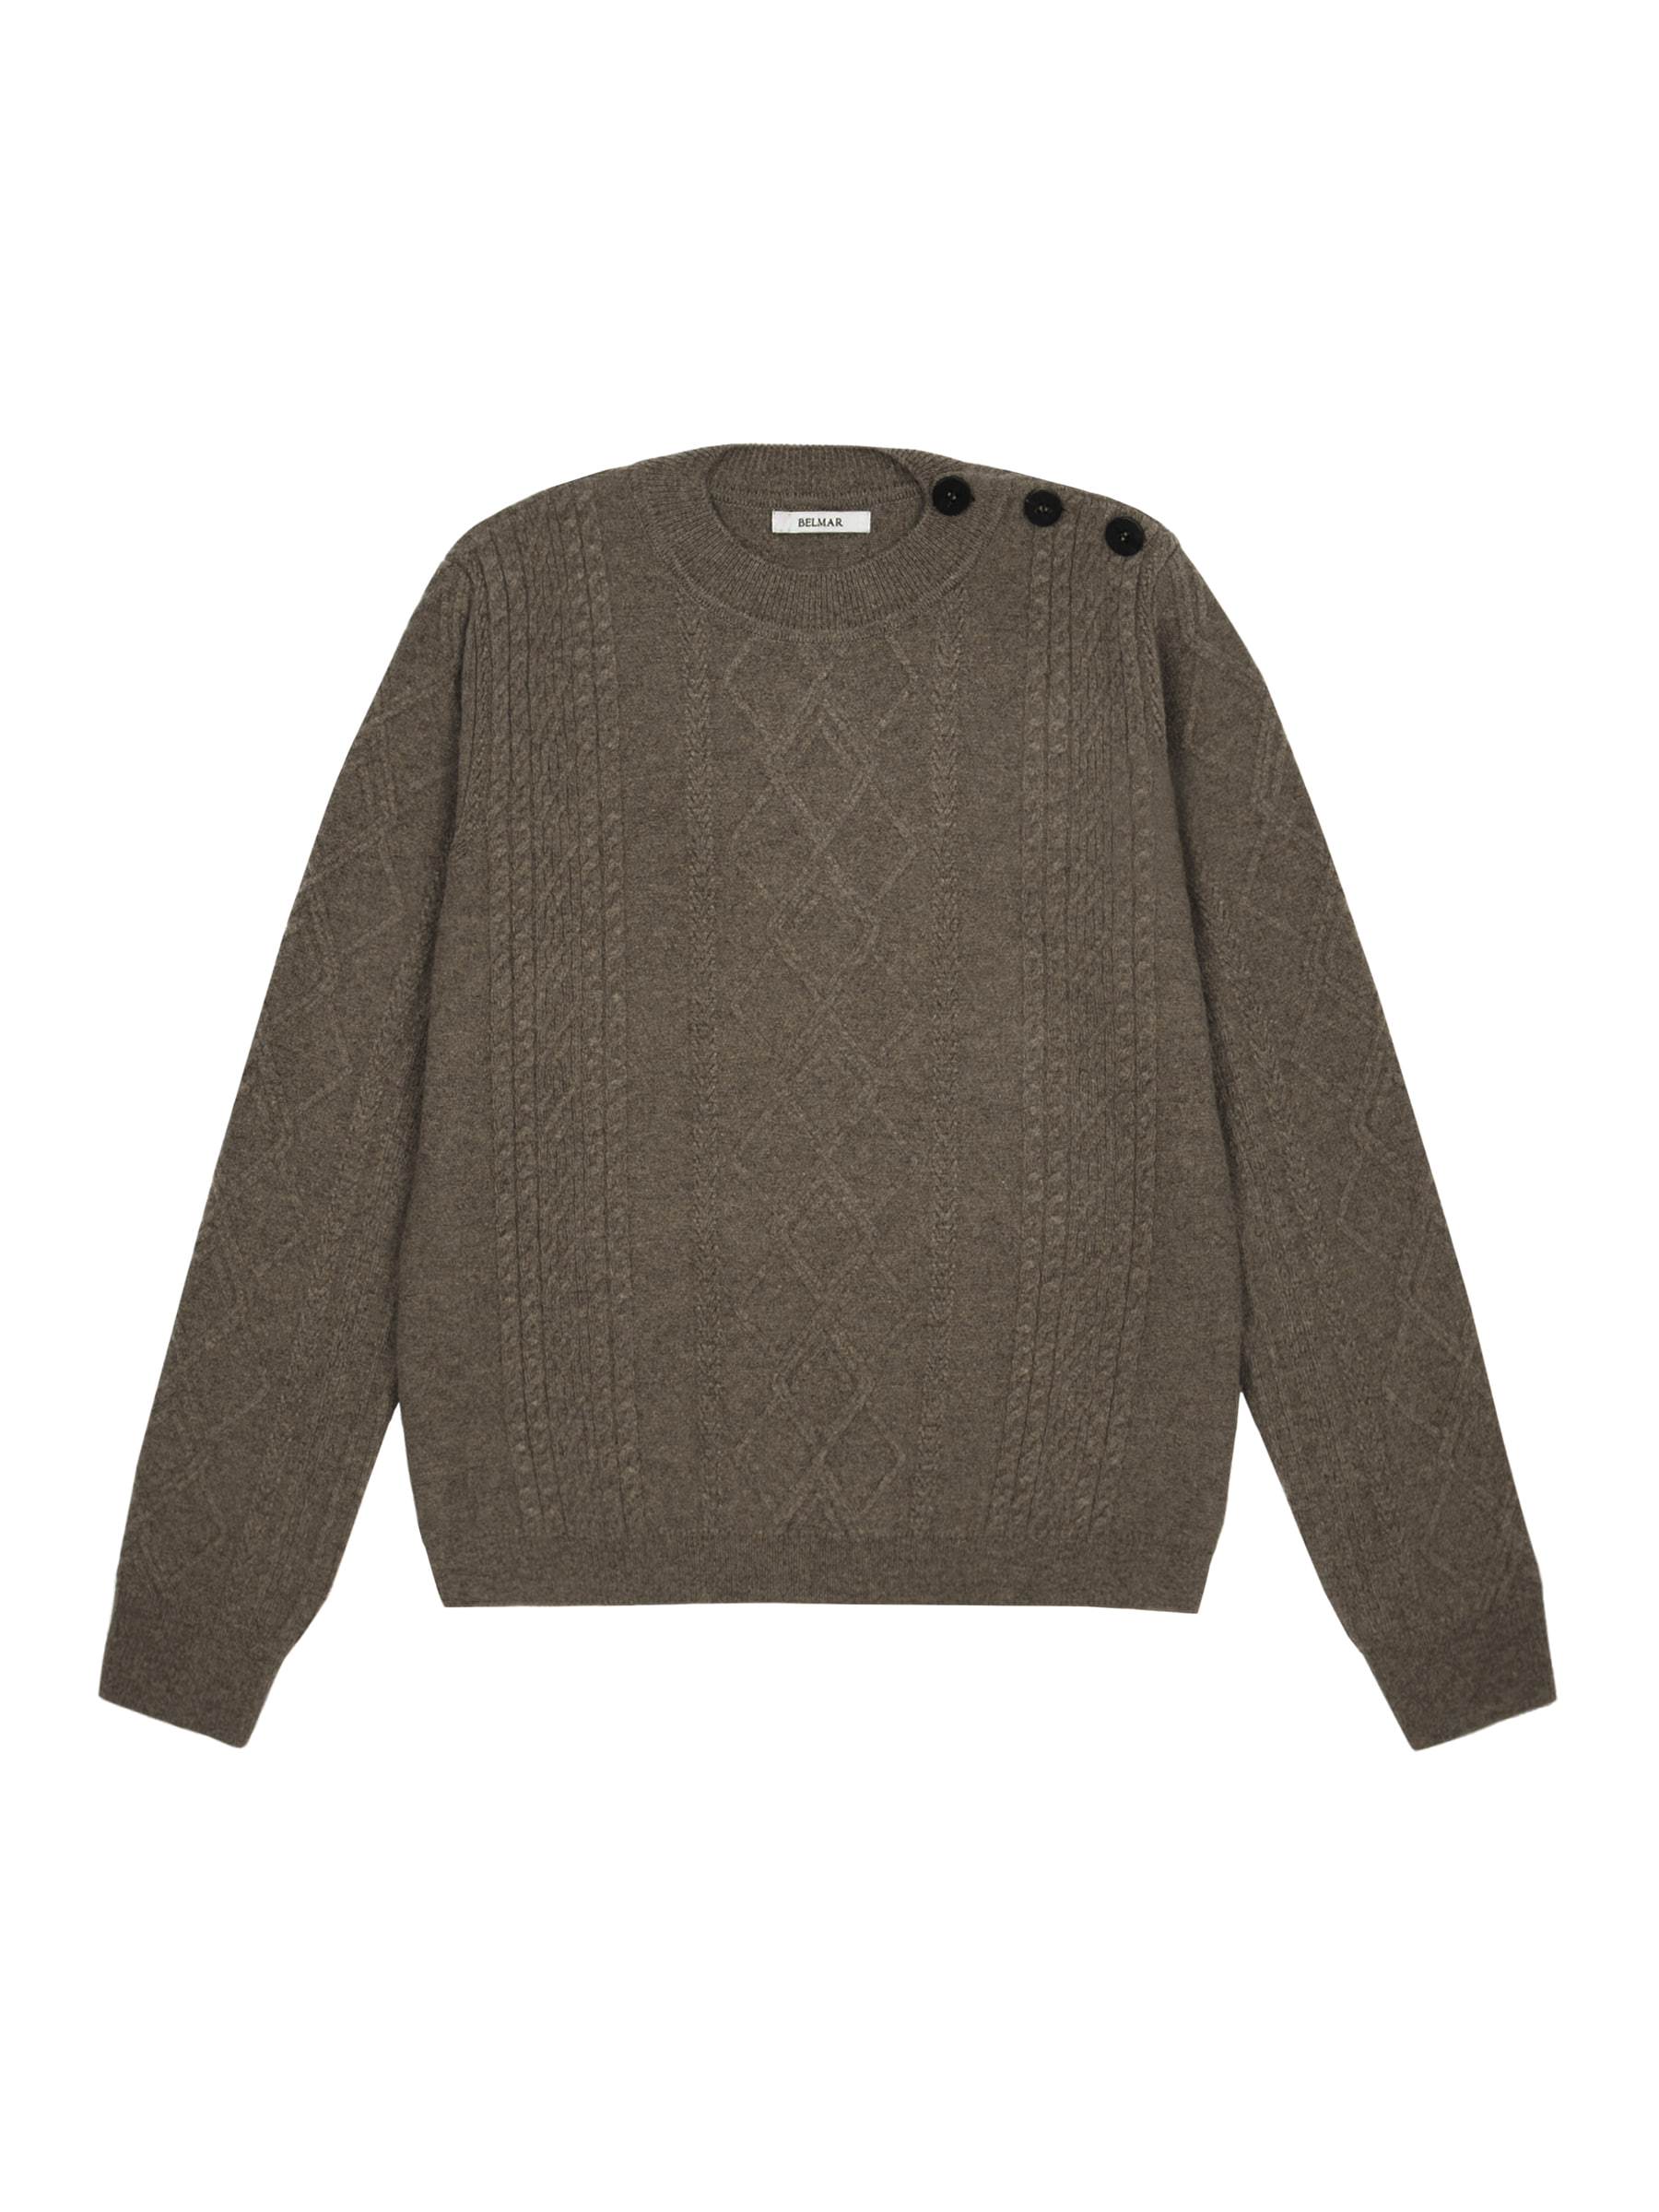 Fisherman Cable Knit